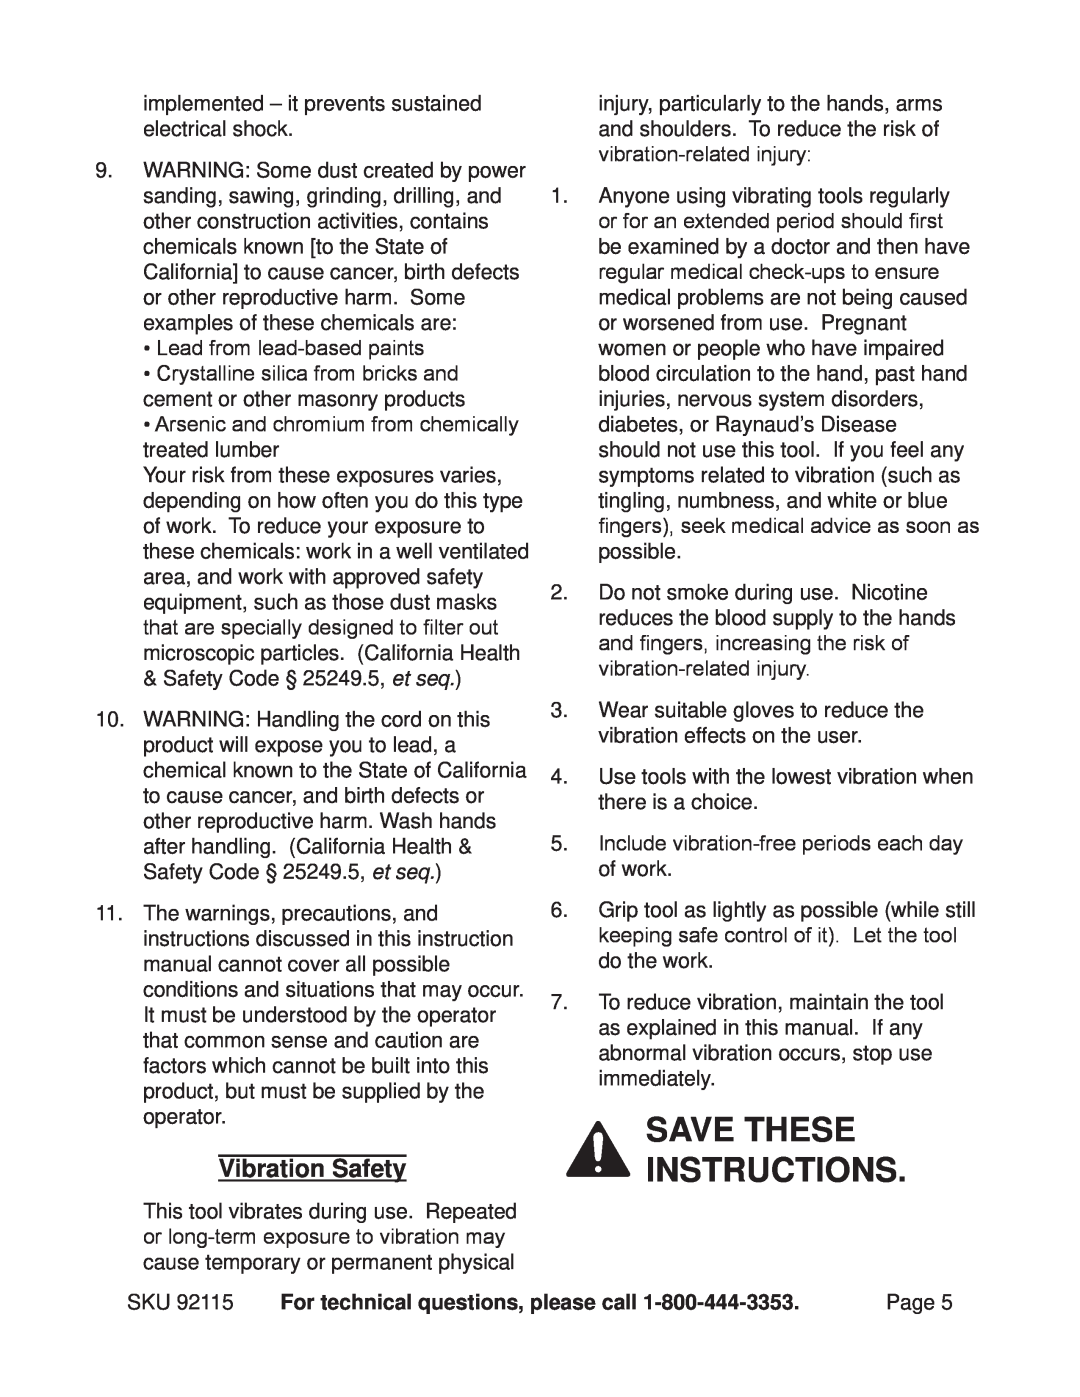 Chicago Electric 92115 operating instructions Save these instructions, Vibration Safety 